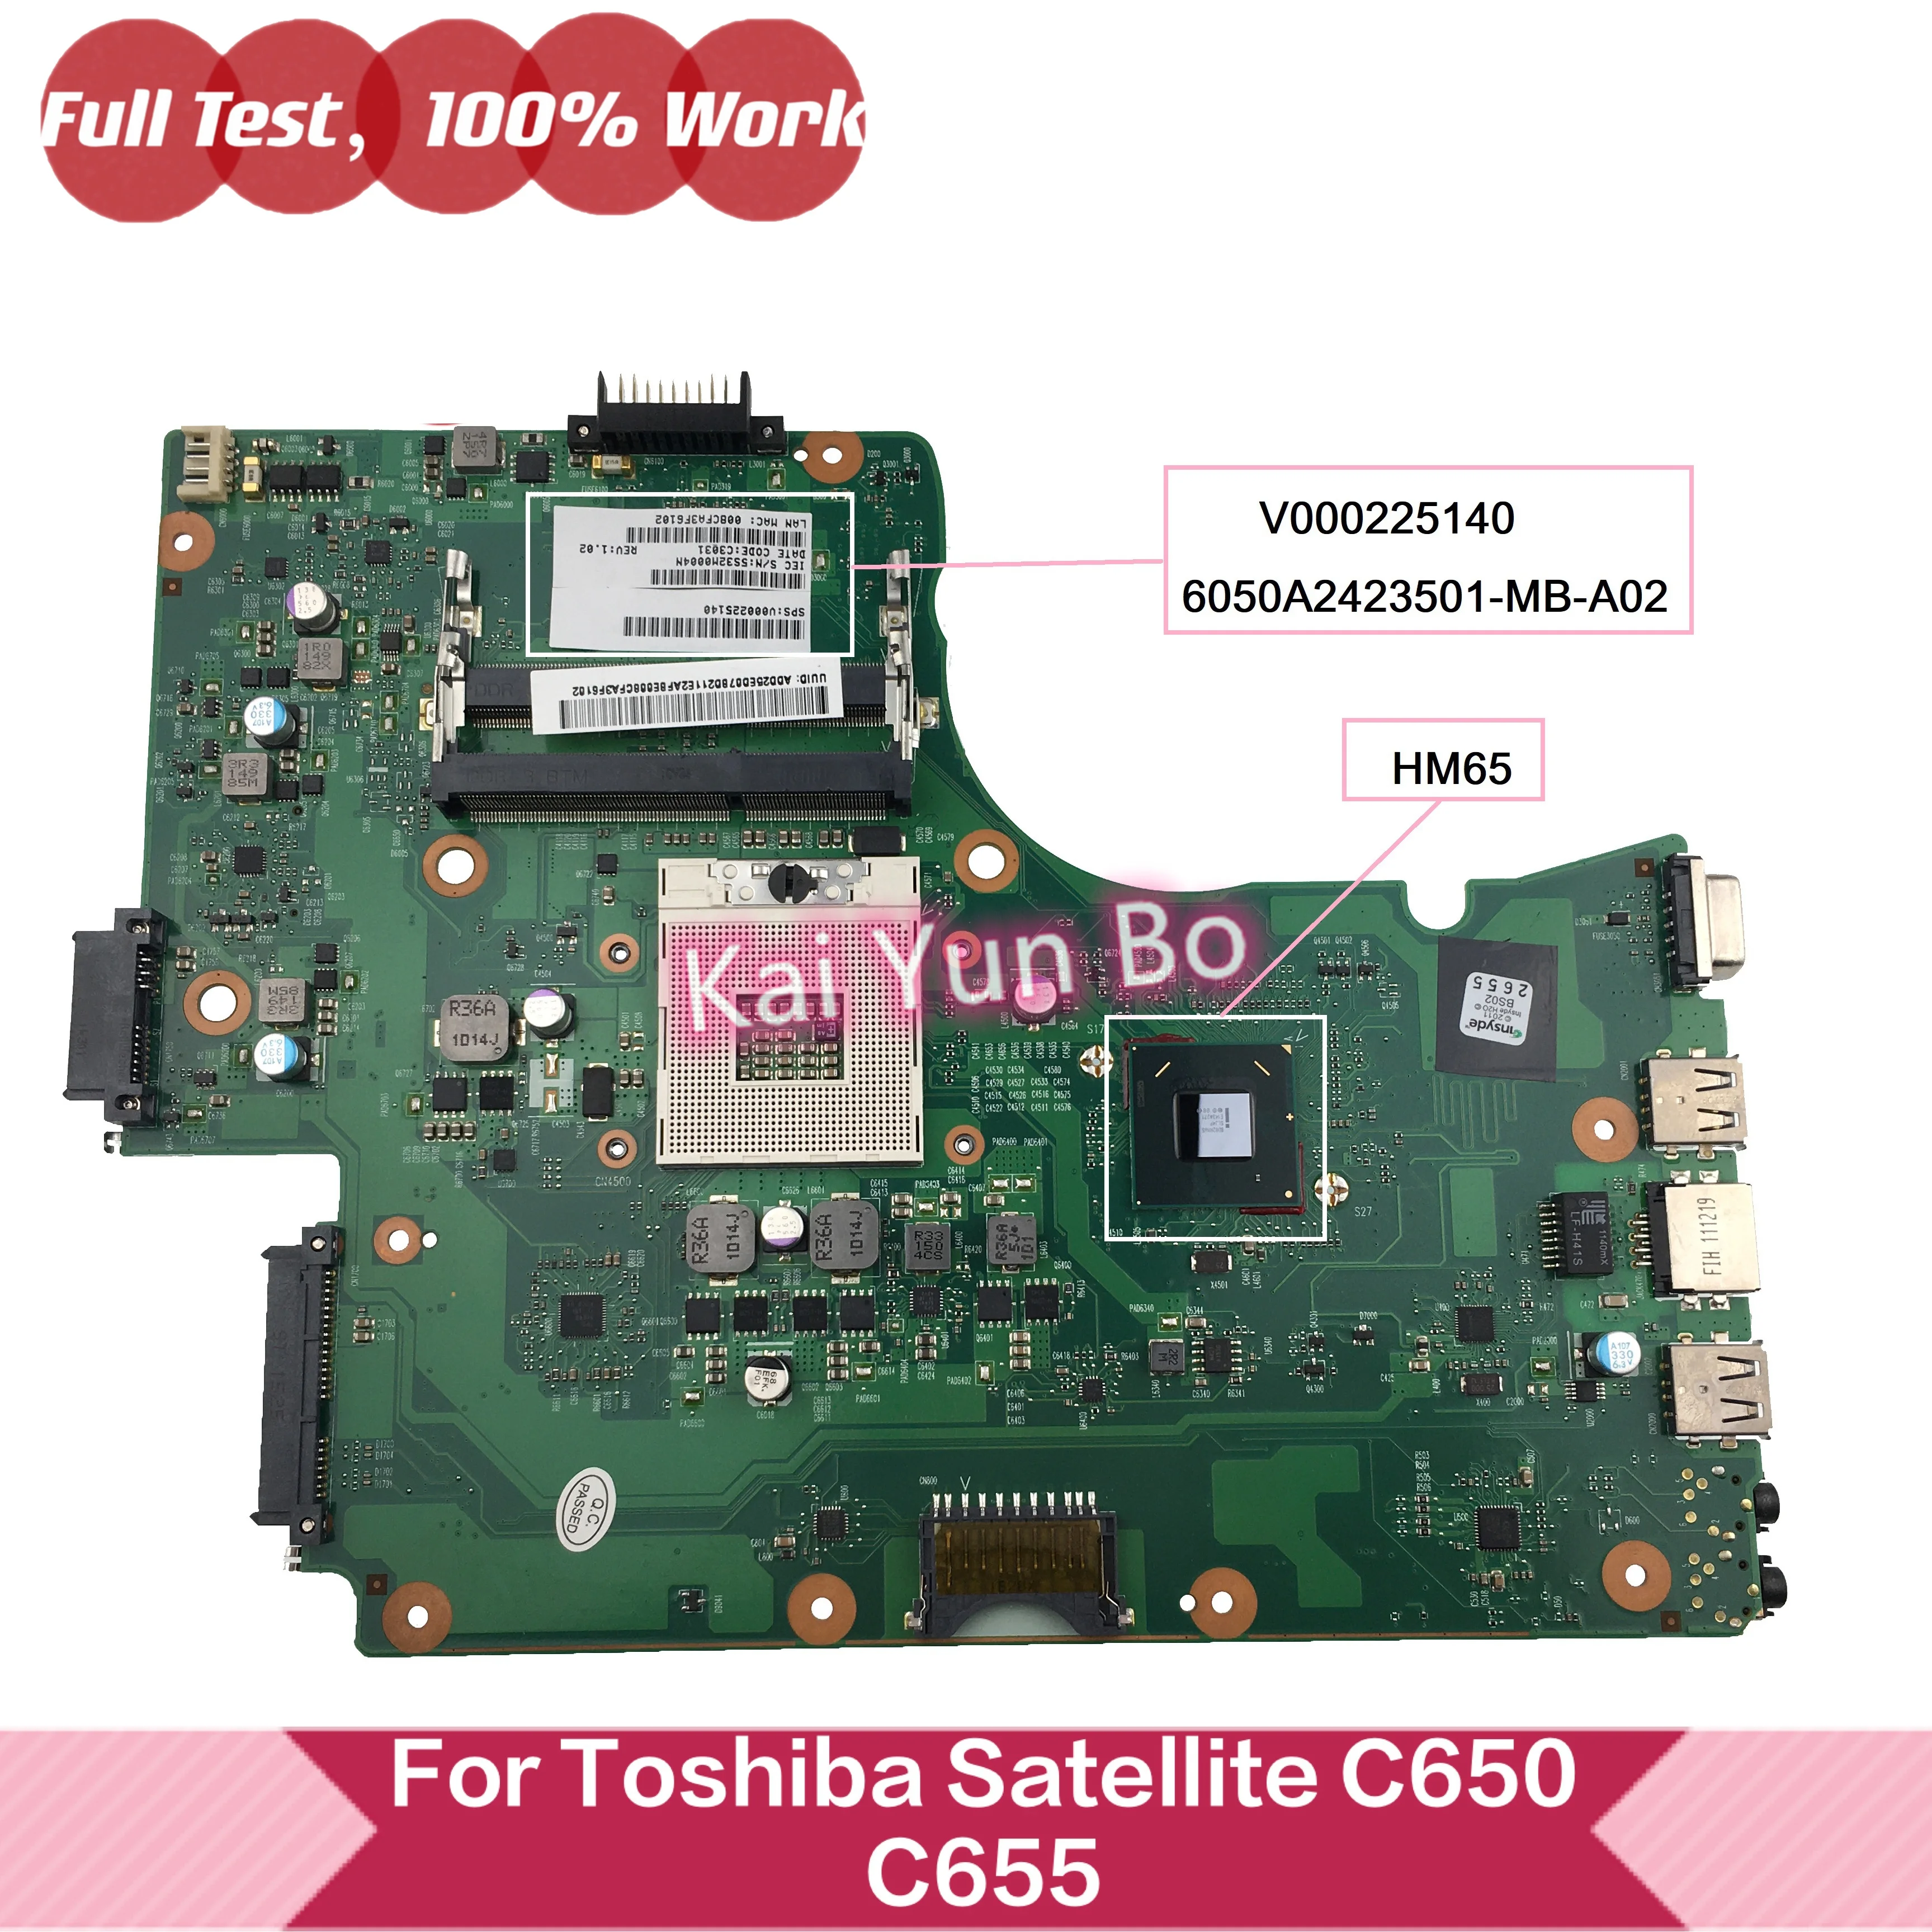 V000225140 6050A2423501 For Toshiba Satellite C650 C655 Laptop Motherboard 6050A2423501-MB-A02 HM65 DDR3 Mainboard 100% Test OK